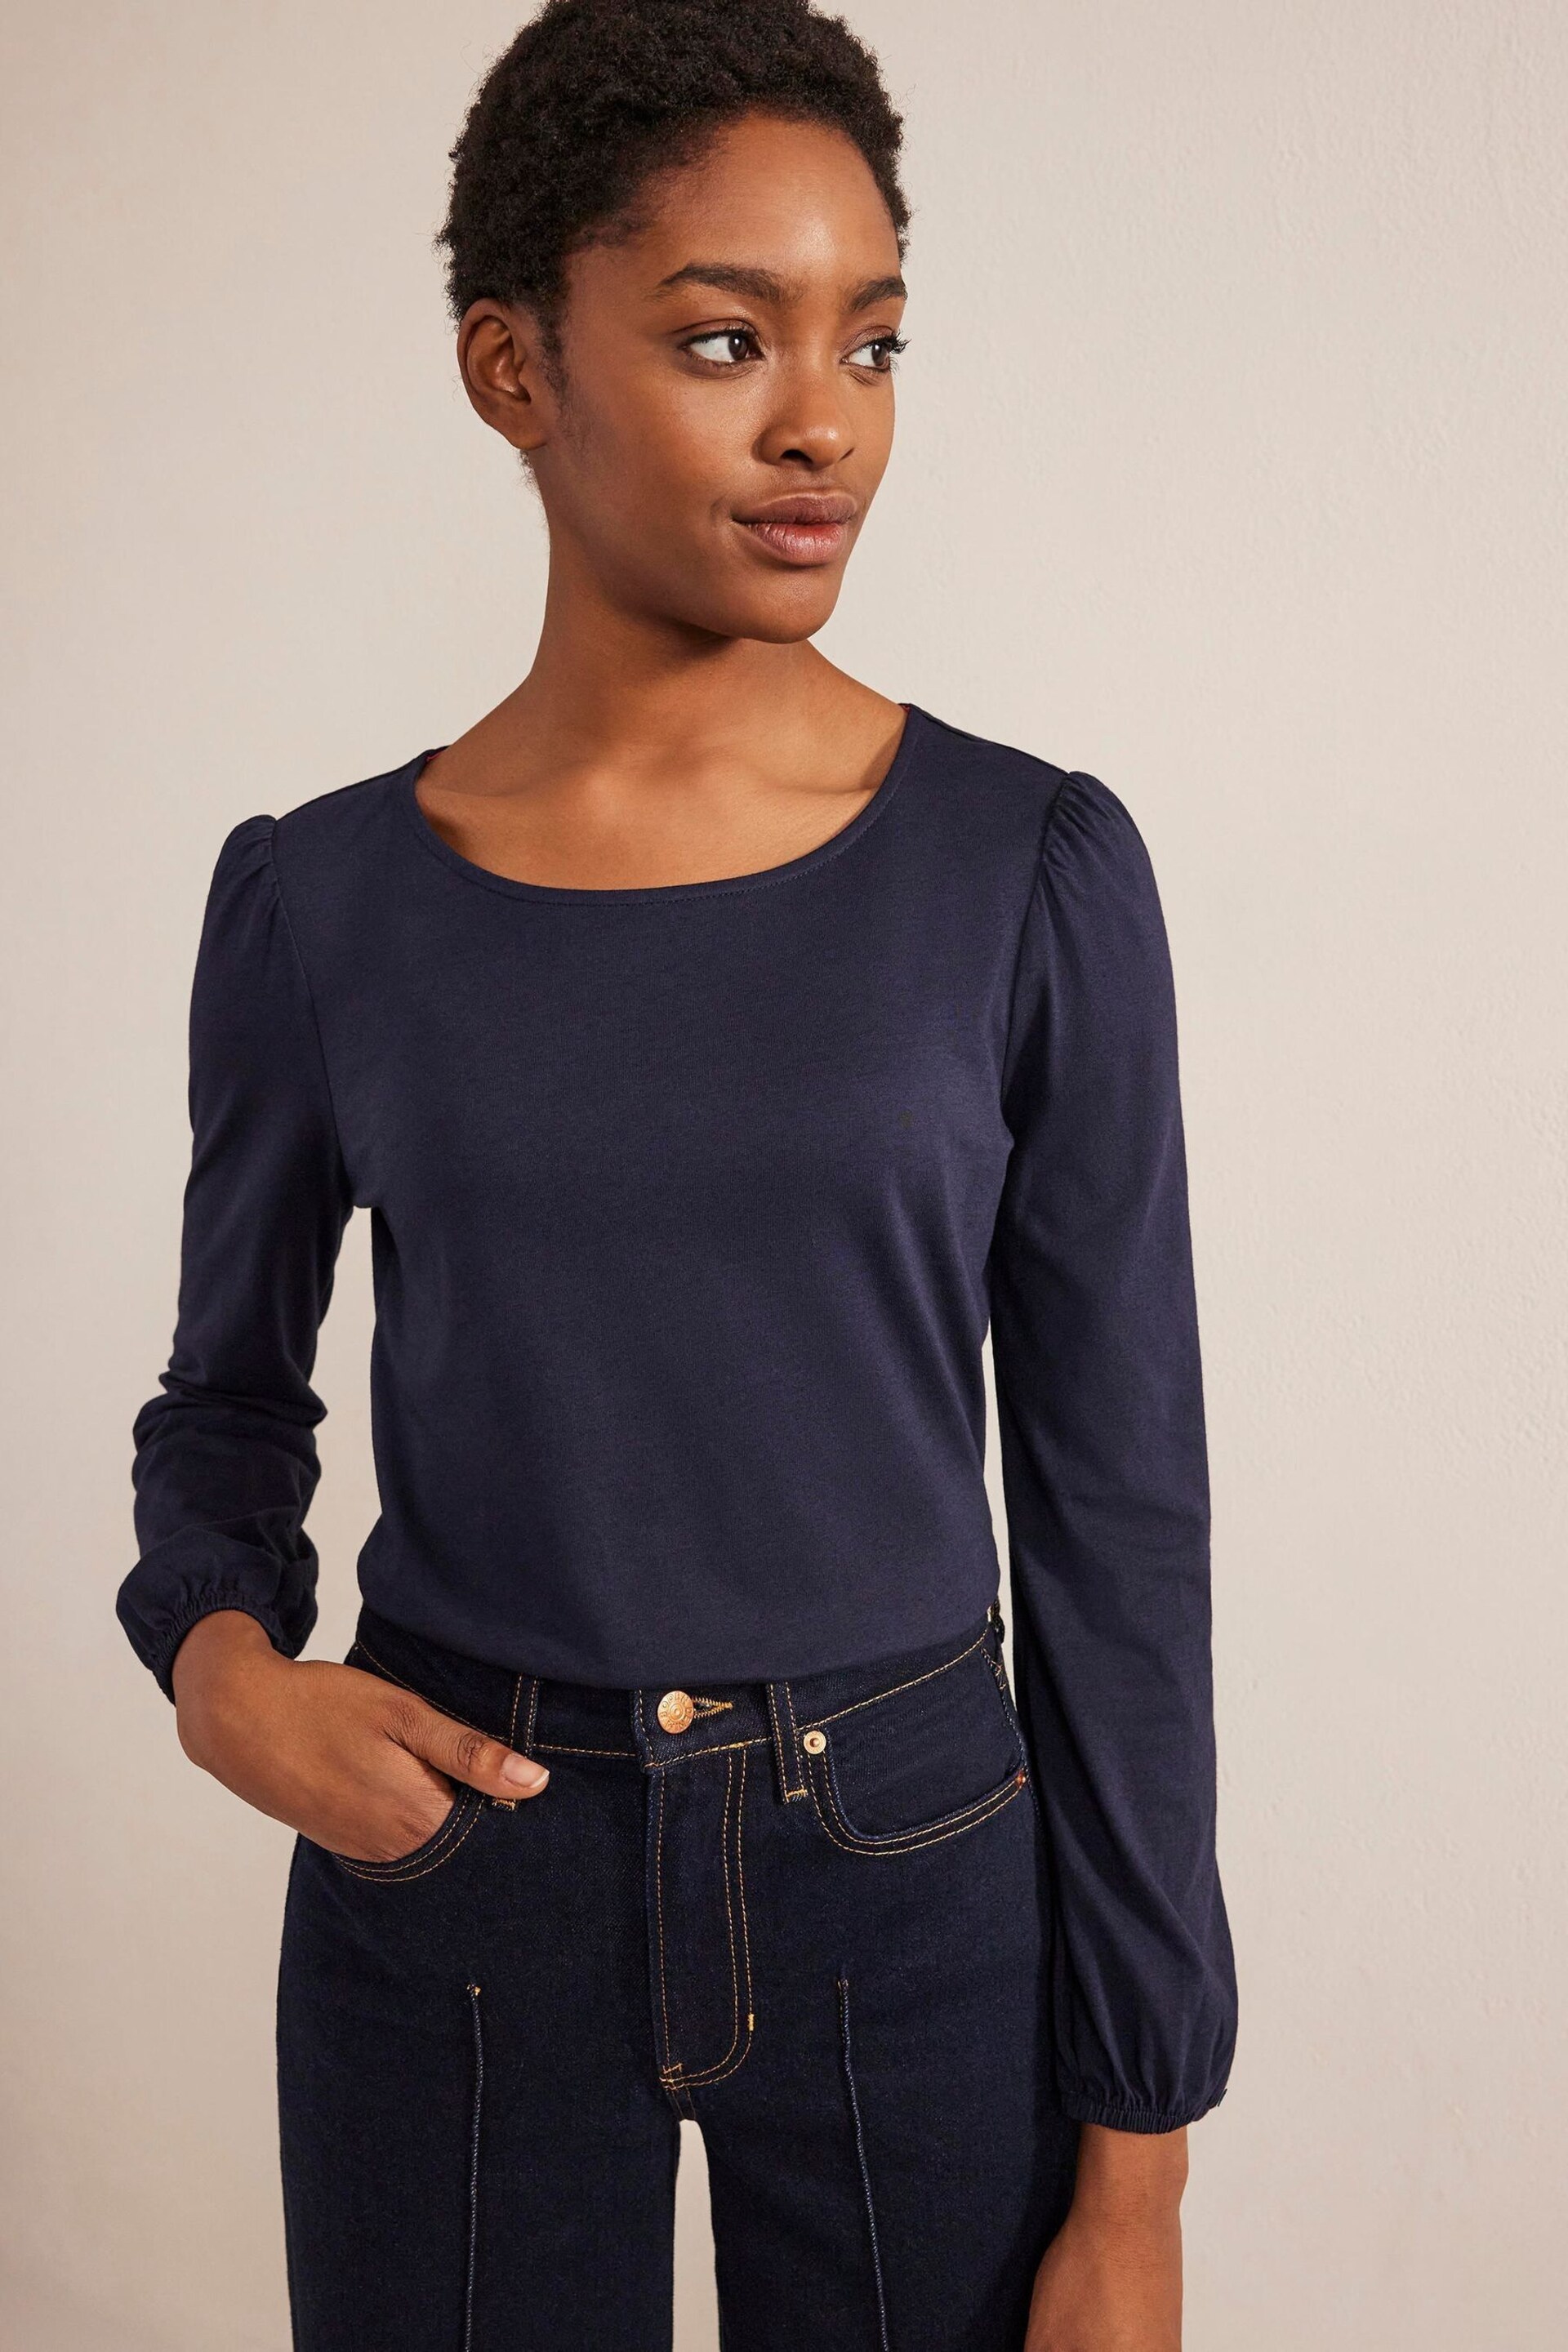 Boden Blue Supersoft Long Sleeve Top - Image 1 of 5